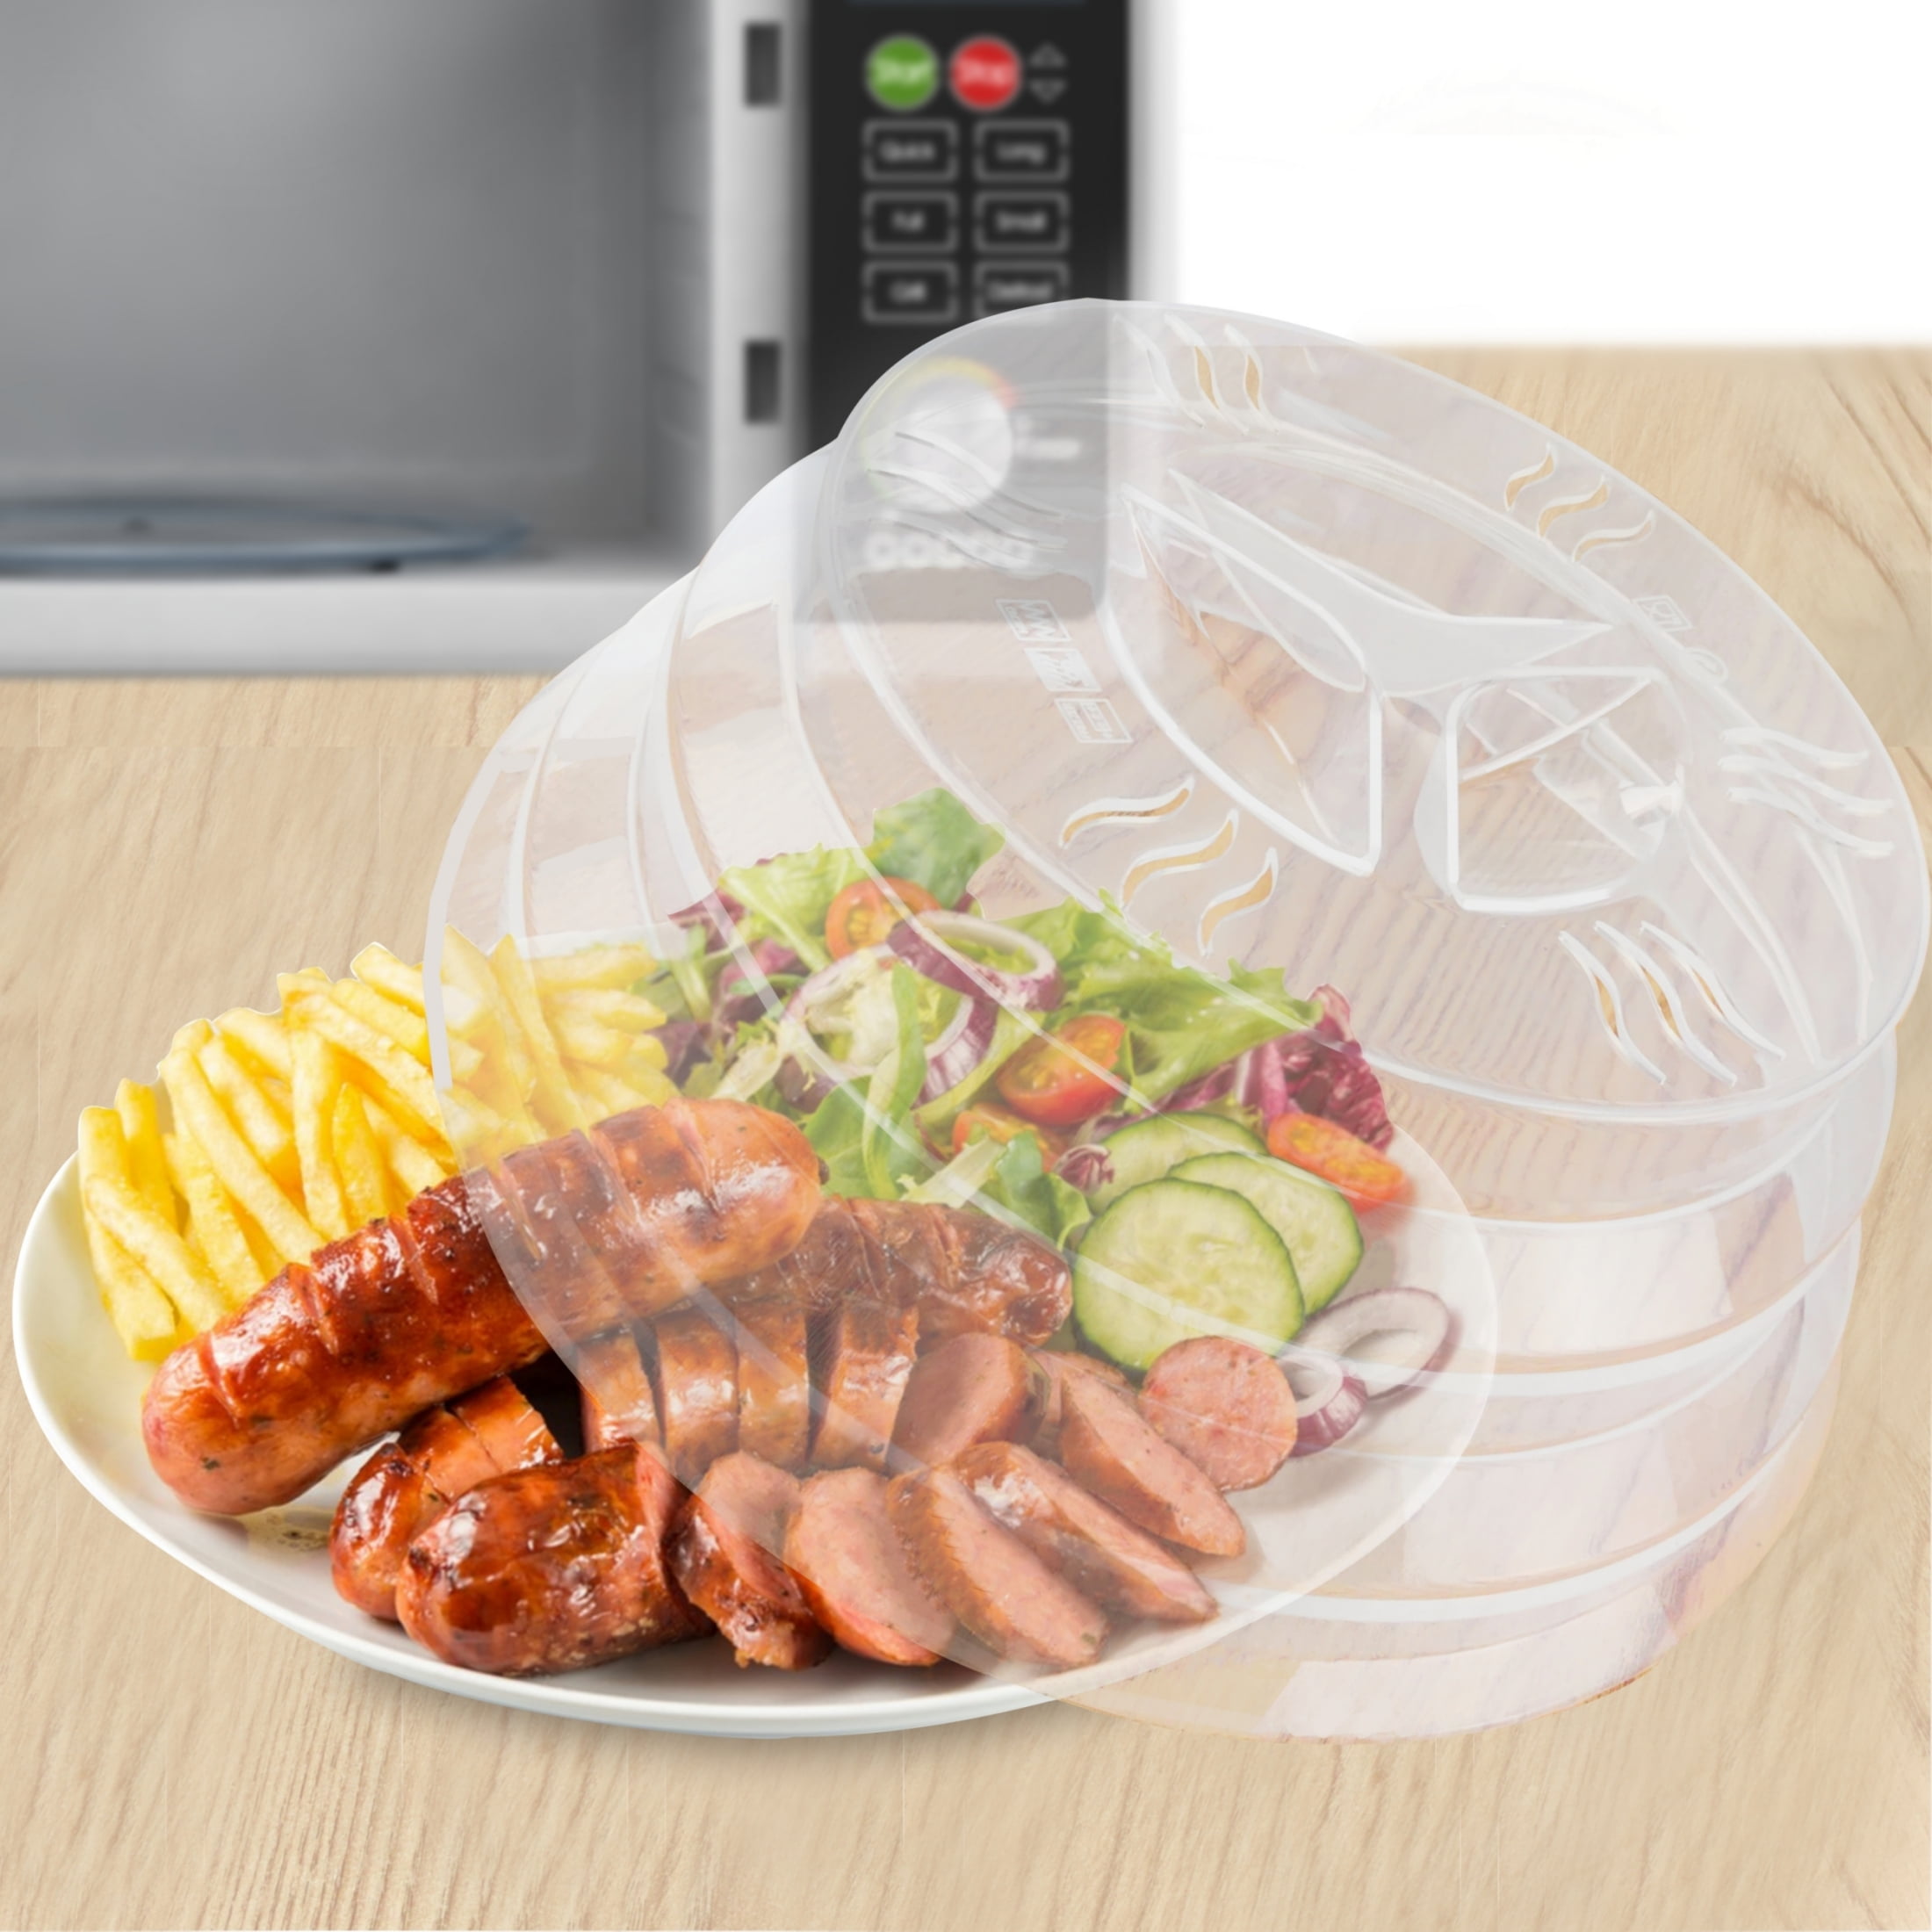 3 in 1, JesDiary Hook Top Microwave Cover for Food&Versatile Mats,12as  Plate Holder, 10 for Bowl, Clear Replace Magnetic Cover Splatter Guard Lid